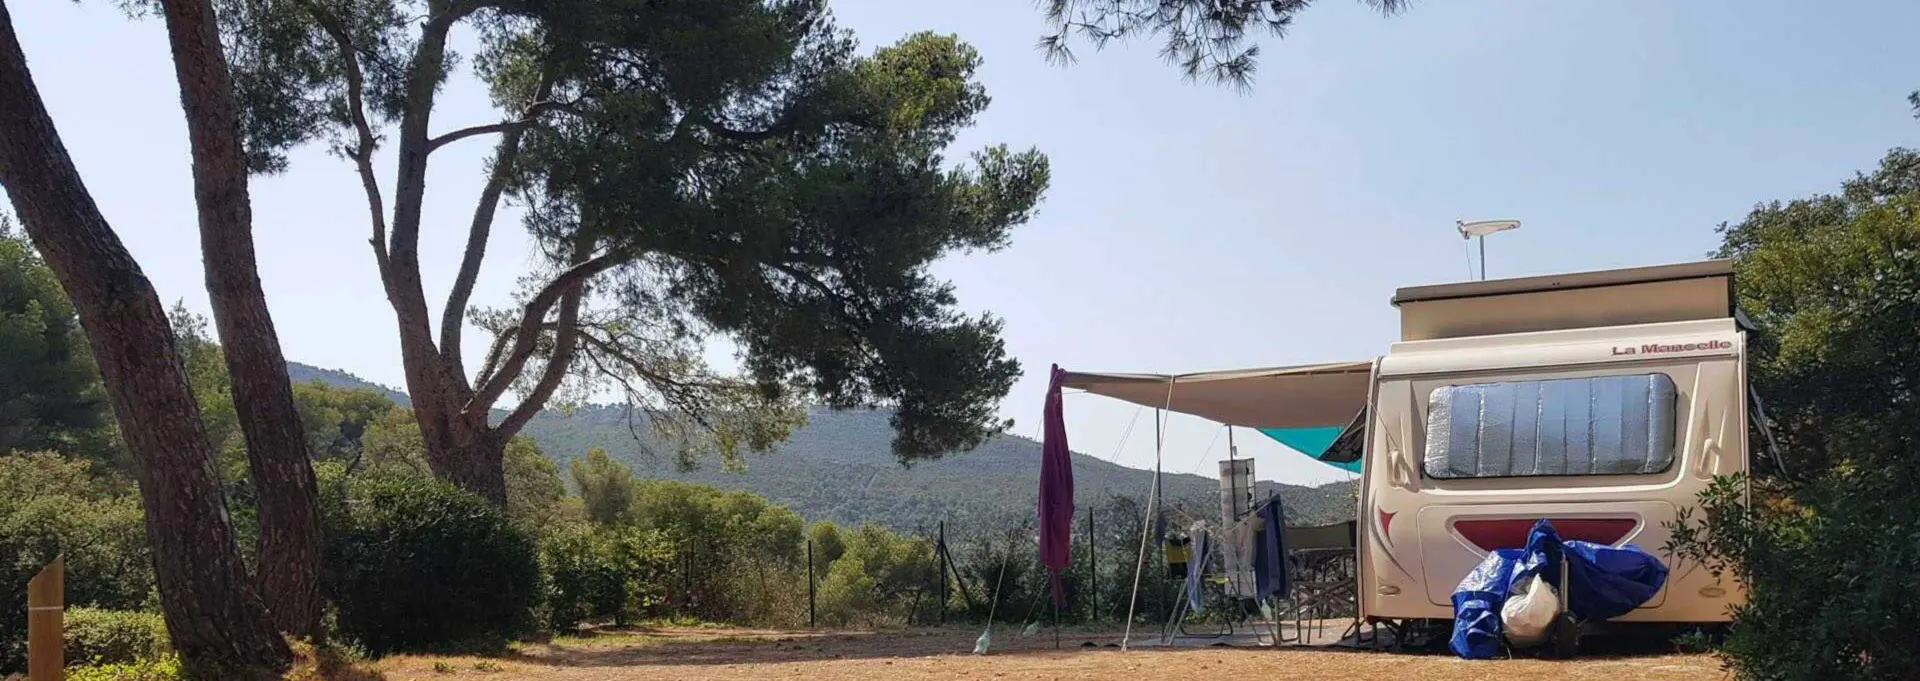 Camping pitches in the Var